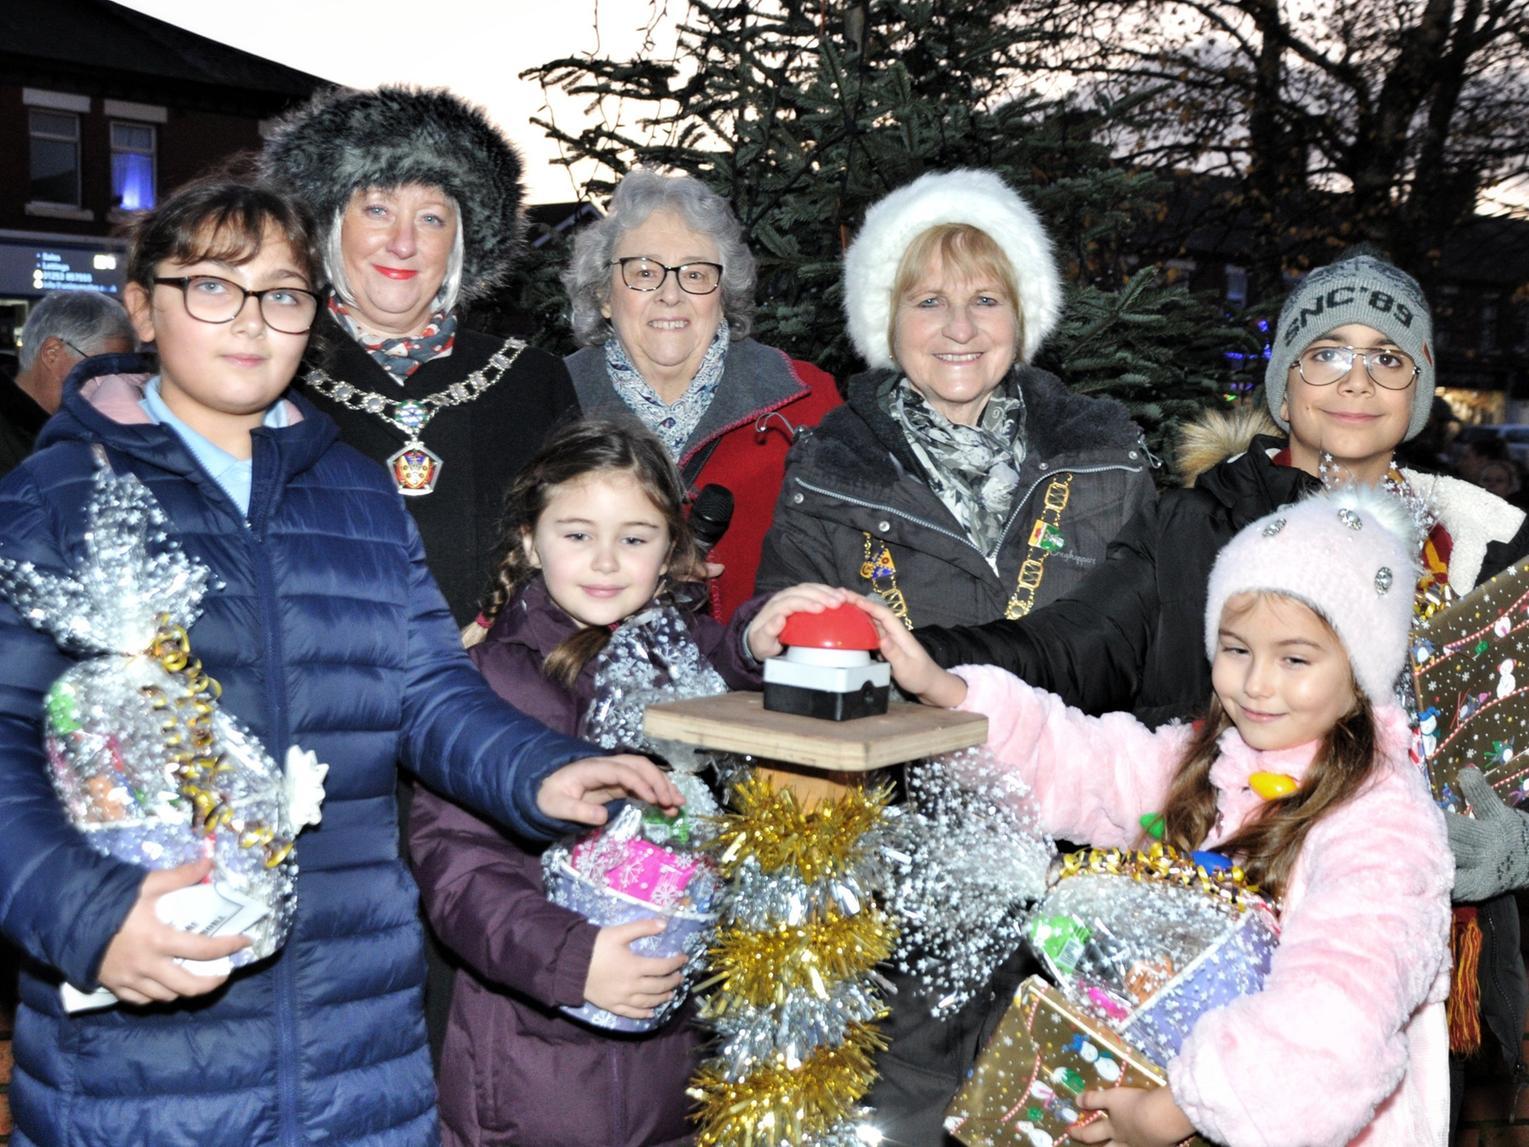 The Mayor and Mayoress are joined by Jenie Phillips and children who entered a competition to switch on the lights